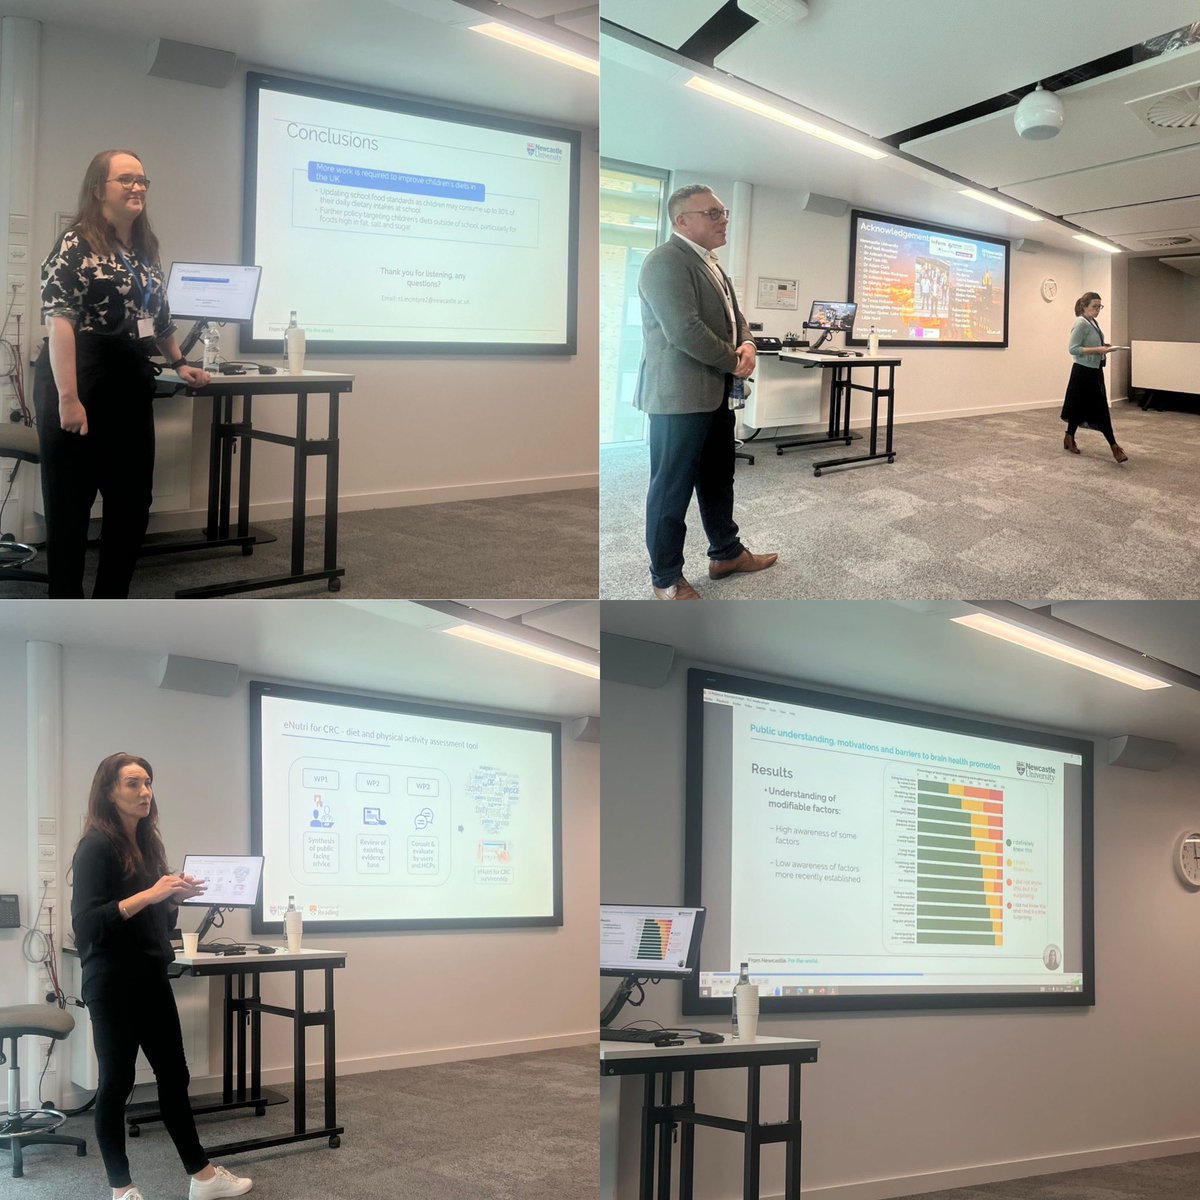 Session three of the @HNERC_NclUni research day involved another series of fascinating presentations: ⭐️ Rebecca McIntyre - diet quality in school children ⭐️ Tom Hill - Vertical Farming ⭐️ Anna Fretwell - Living beyond colorectal cancer ⭐️@rebeccatownsnd - Brain health